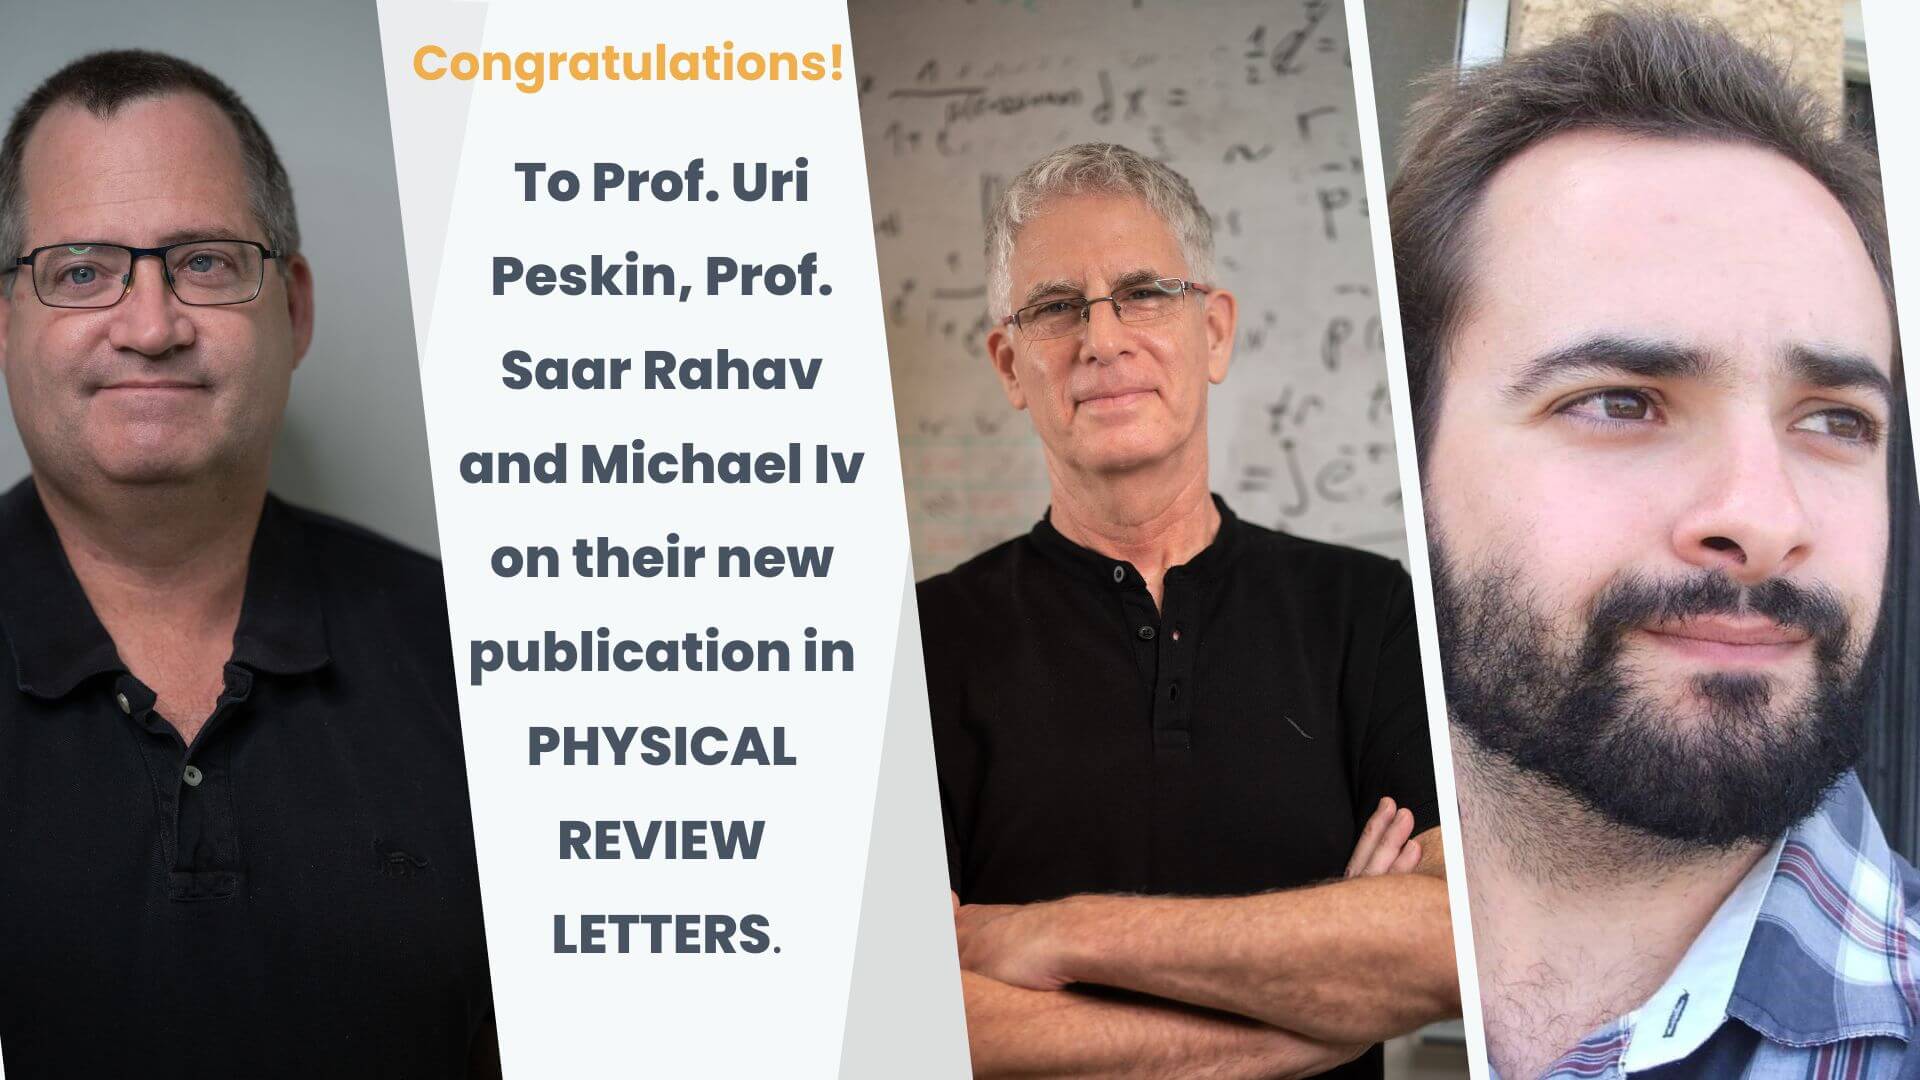 To Prof. Uri Peskin, Prof. Saar Rahav and Michael Iv on their new publication in PHYSICAL REVIEW
LETTERS.
